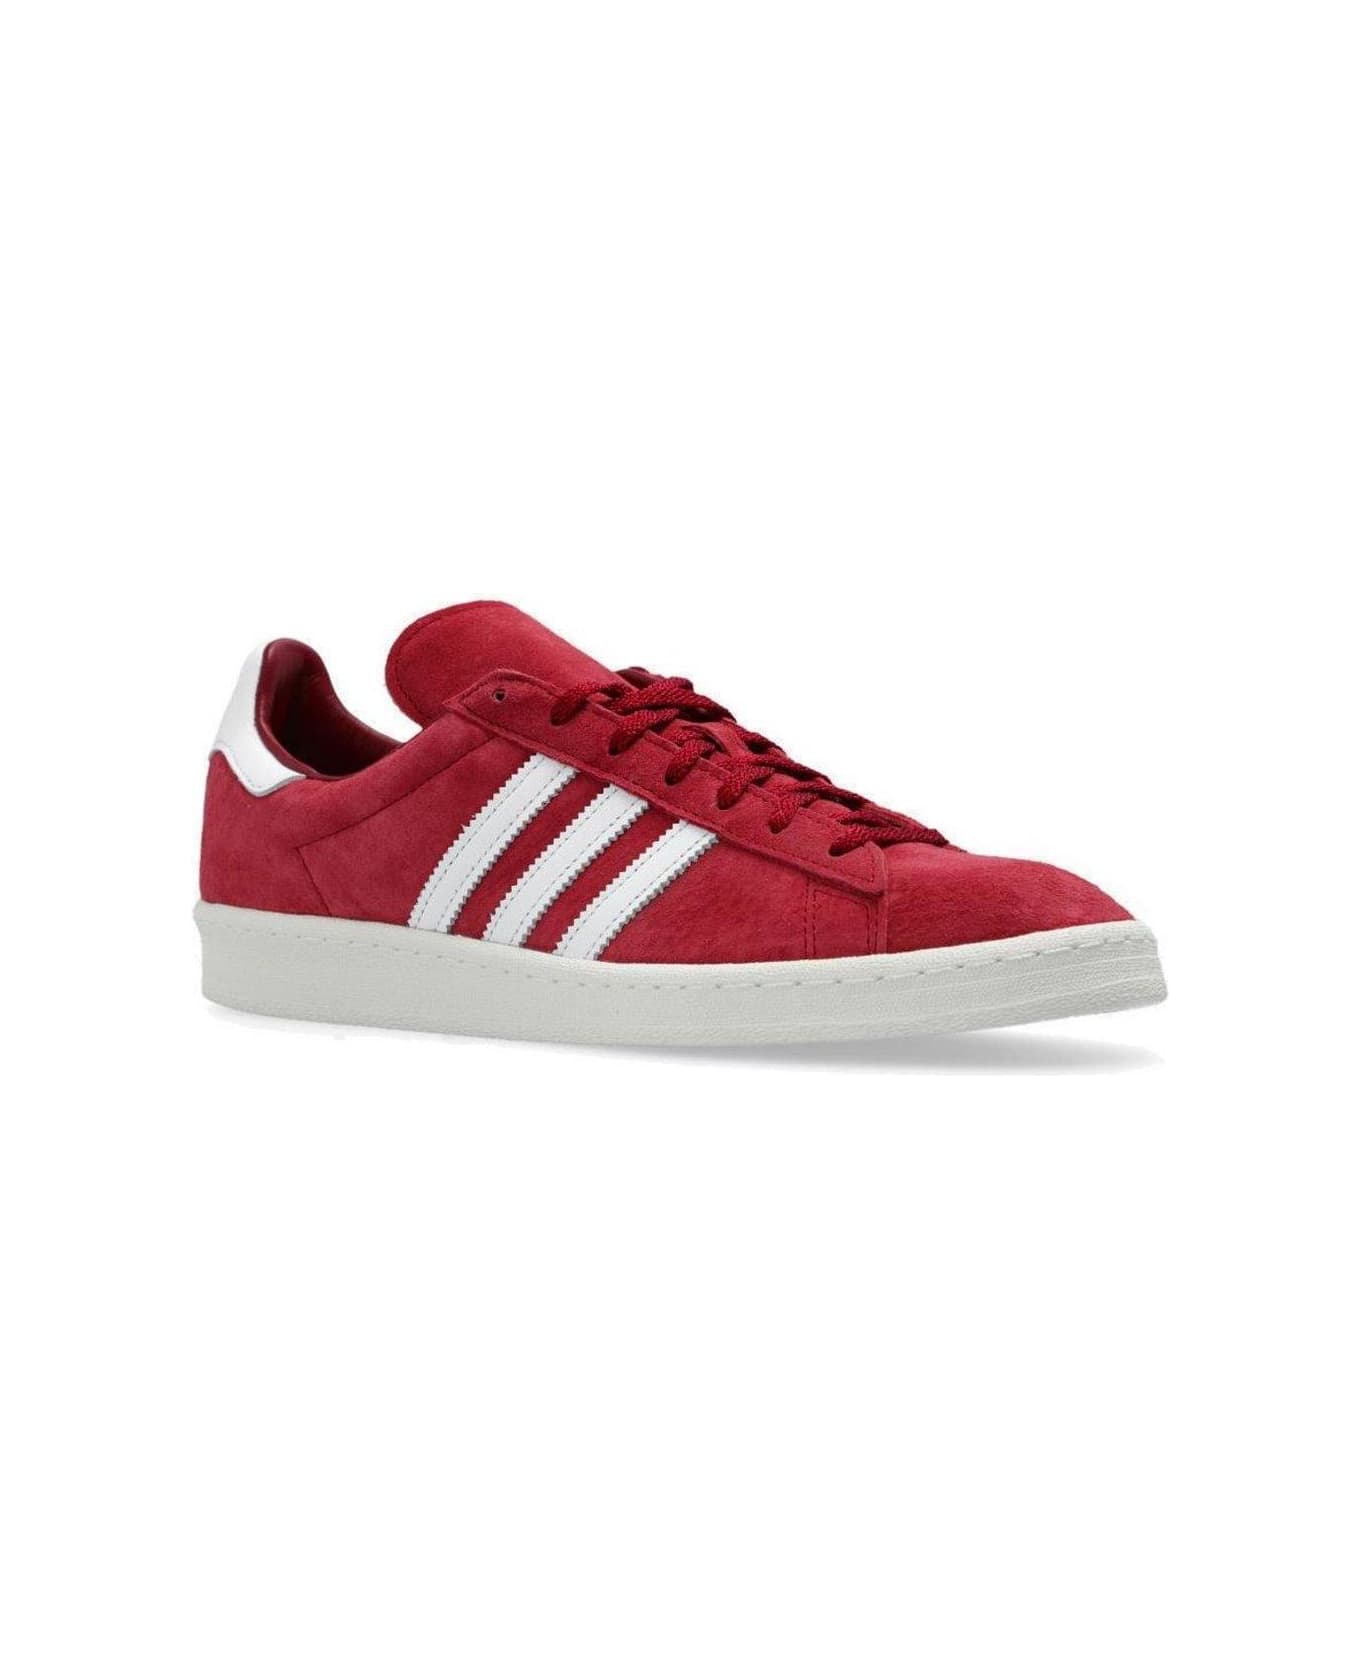 Adidas Campus 80s Lace-up Sneakers - BORDEAUX